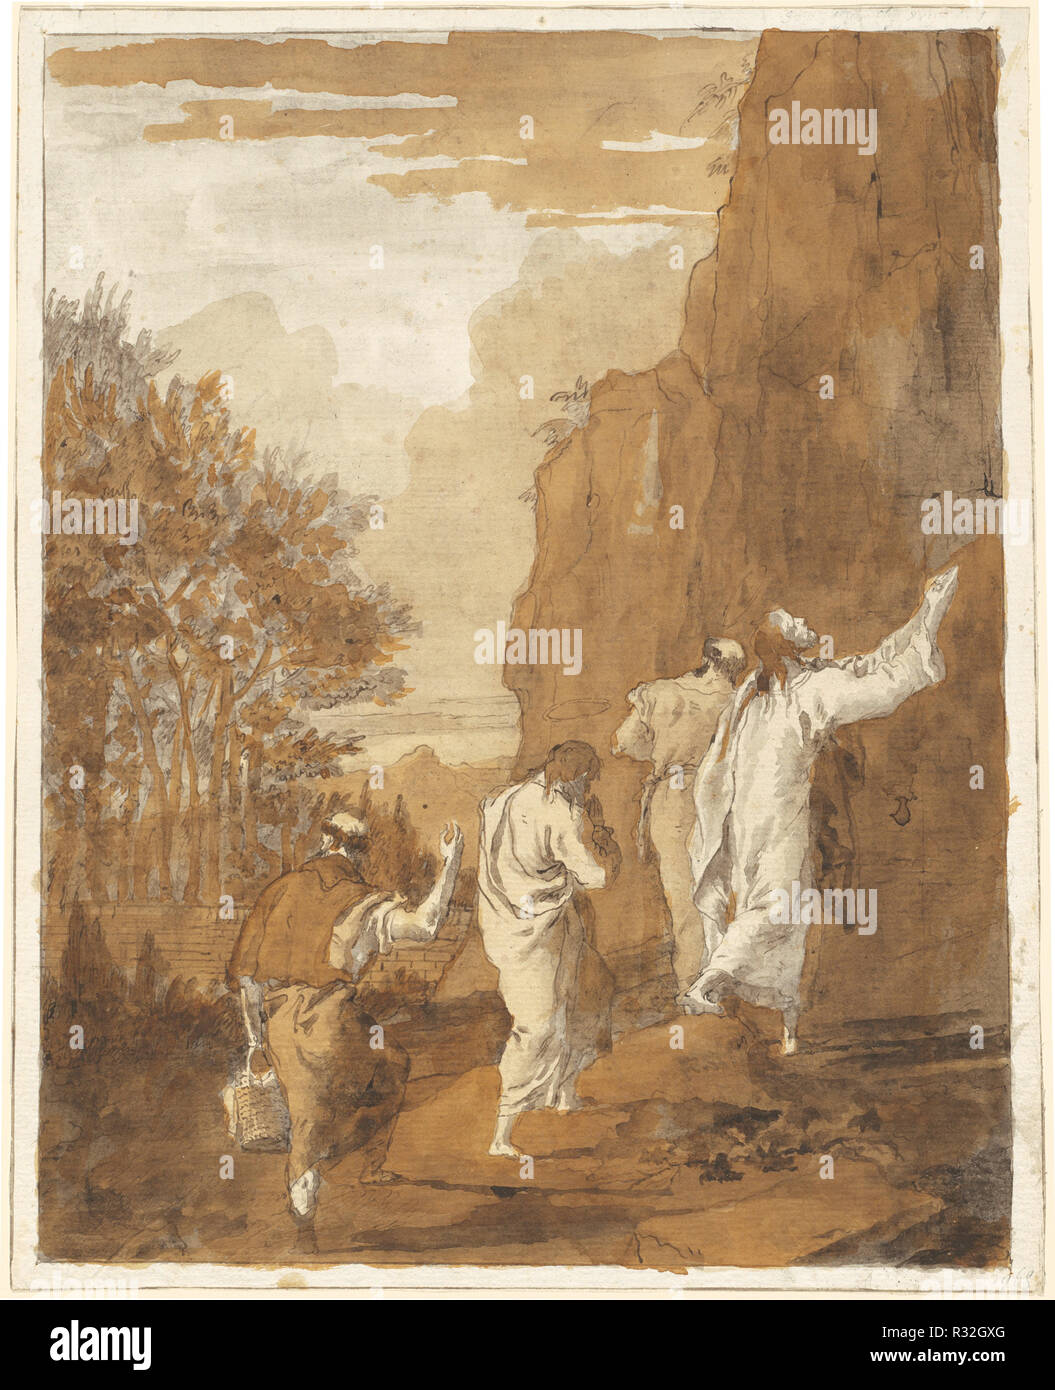 Christ Leading Peter, James, and John to the High Mountain for the Transfiguration. Dated: 1785/1795. Dimensions: overall: 48 × 38.6 cm (18 7/8 × 15 3/16 in.). Medium: pen and gray ink and pen and black ink over black chalk with a variety of gray, black, brown and golden brown washes. Museum: National Gallery of Art, Washington DC. Author: Giovanni Domenico Tiepolo. Stock Photo